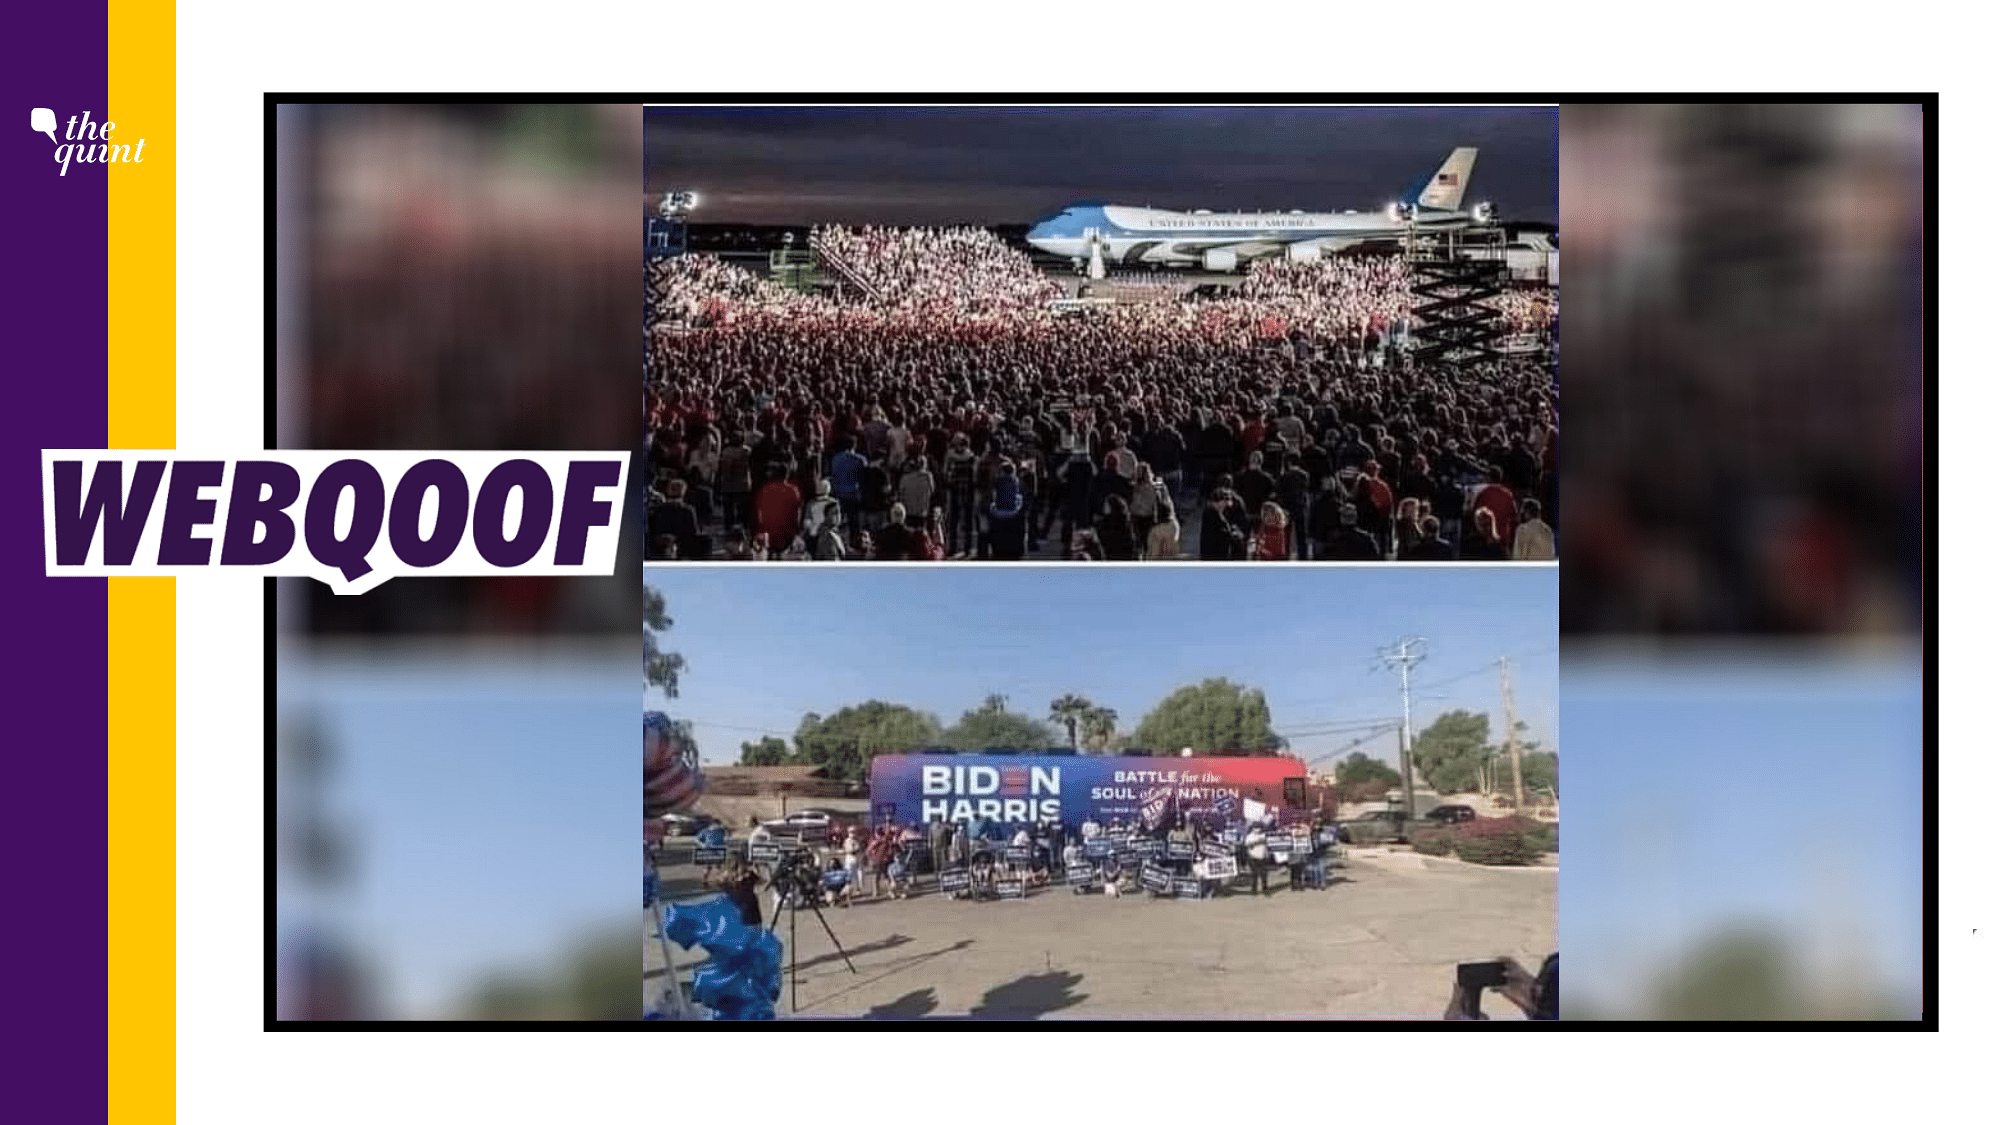 While Trump continues to hold in-person rallies with huge crowds, Biden has stuck to socially-distanced rallies.